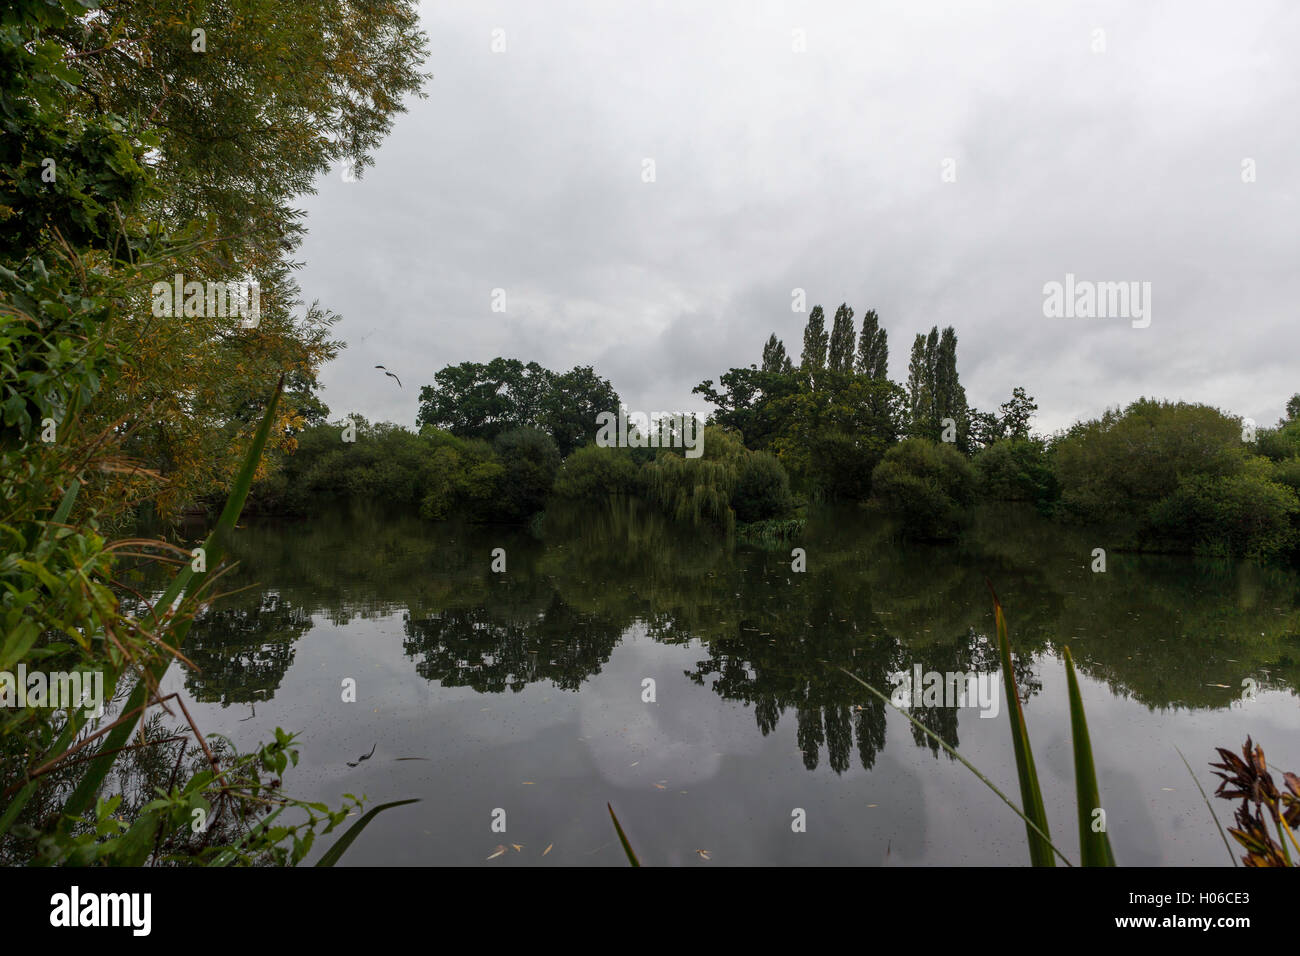 Yateley, UK - 20 September 2016: Thick grey stormy clouds with plenty of drizzle over the county of Berkshire, with temperature's around 15 degrees. Credit:  Robert Norris/ Alamy Live News Stock Photo